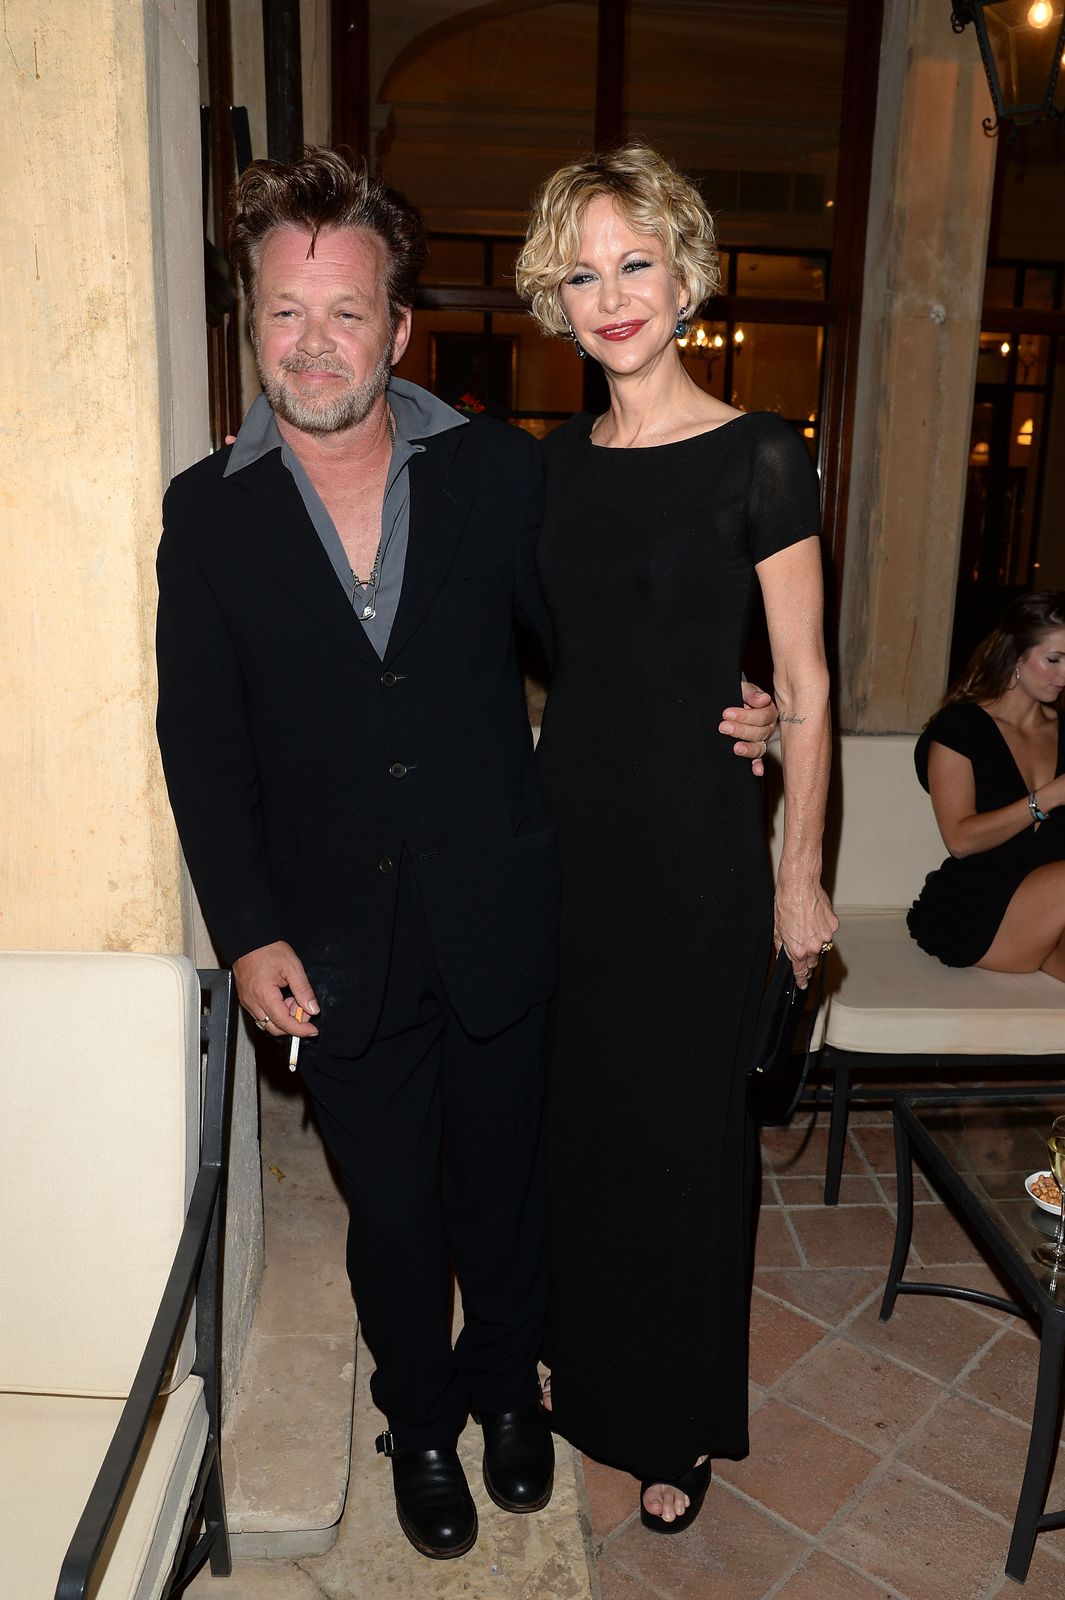 John Mellencamp and Meg Ryan at the Taormina Filmfest held at the Teatro Antico on June 20, 2013, in Italy | Photo: Venturelli/Getty Images